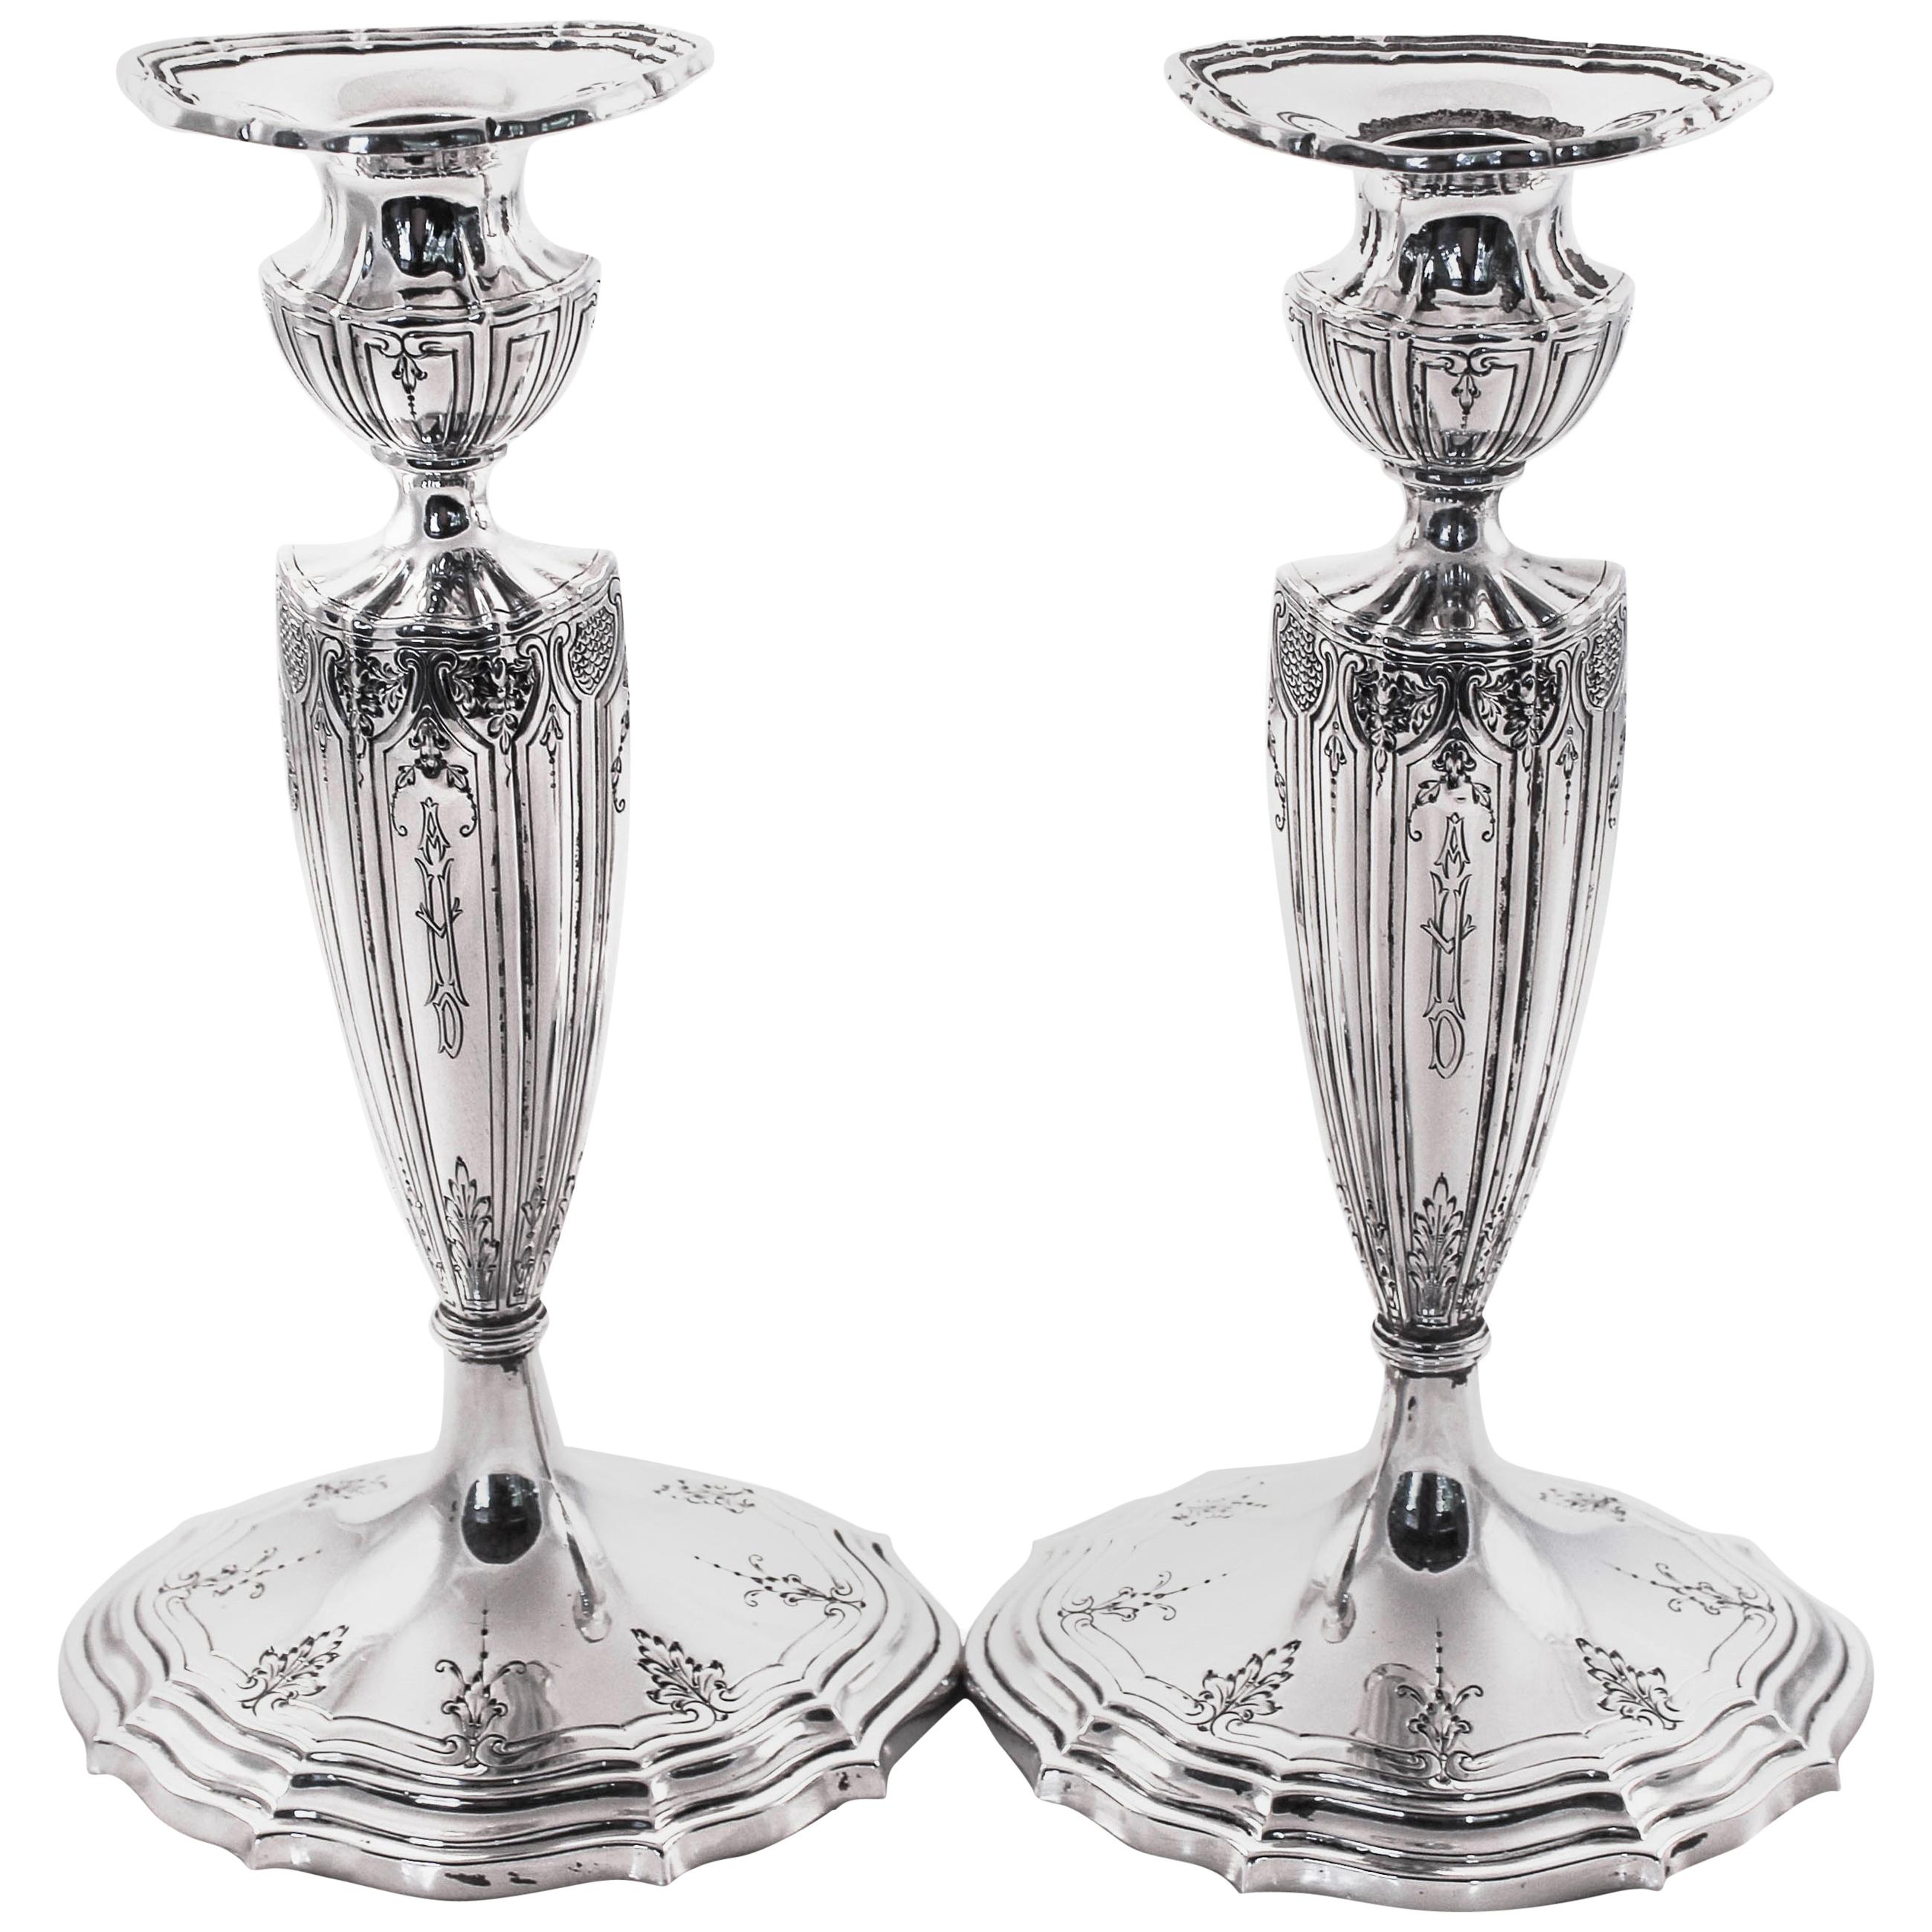 Magnificent Sterling Candlesticks